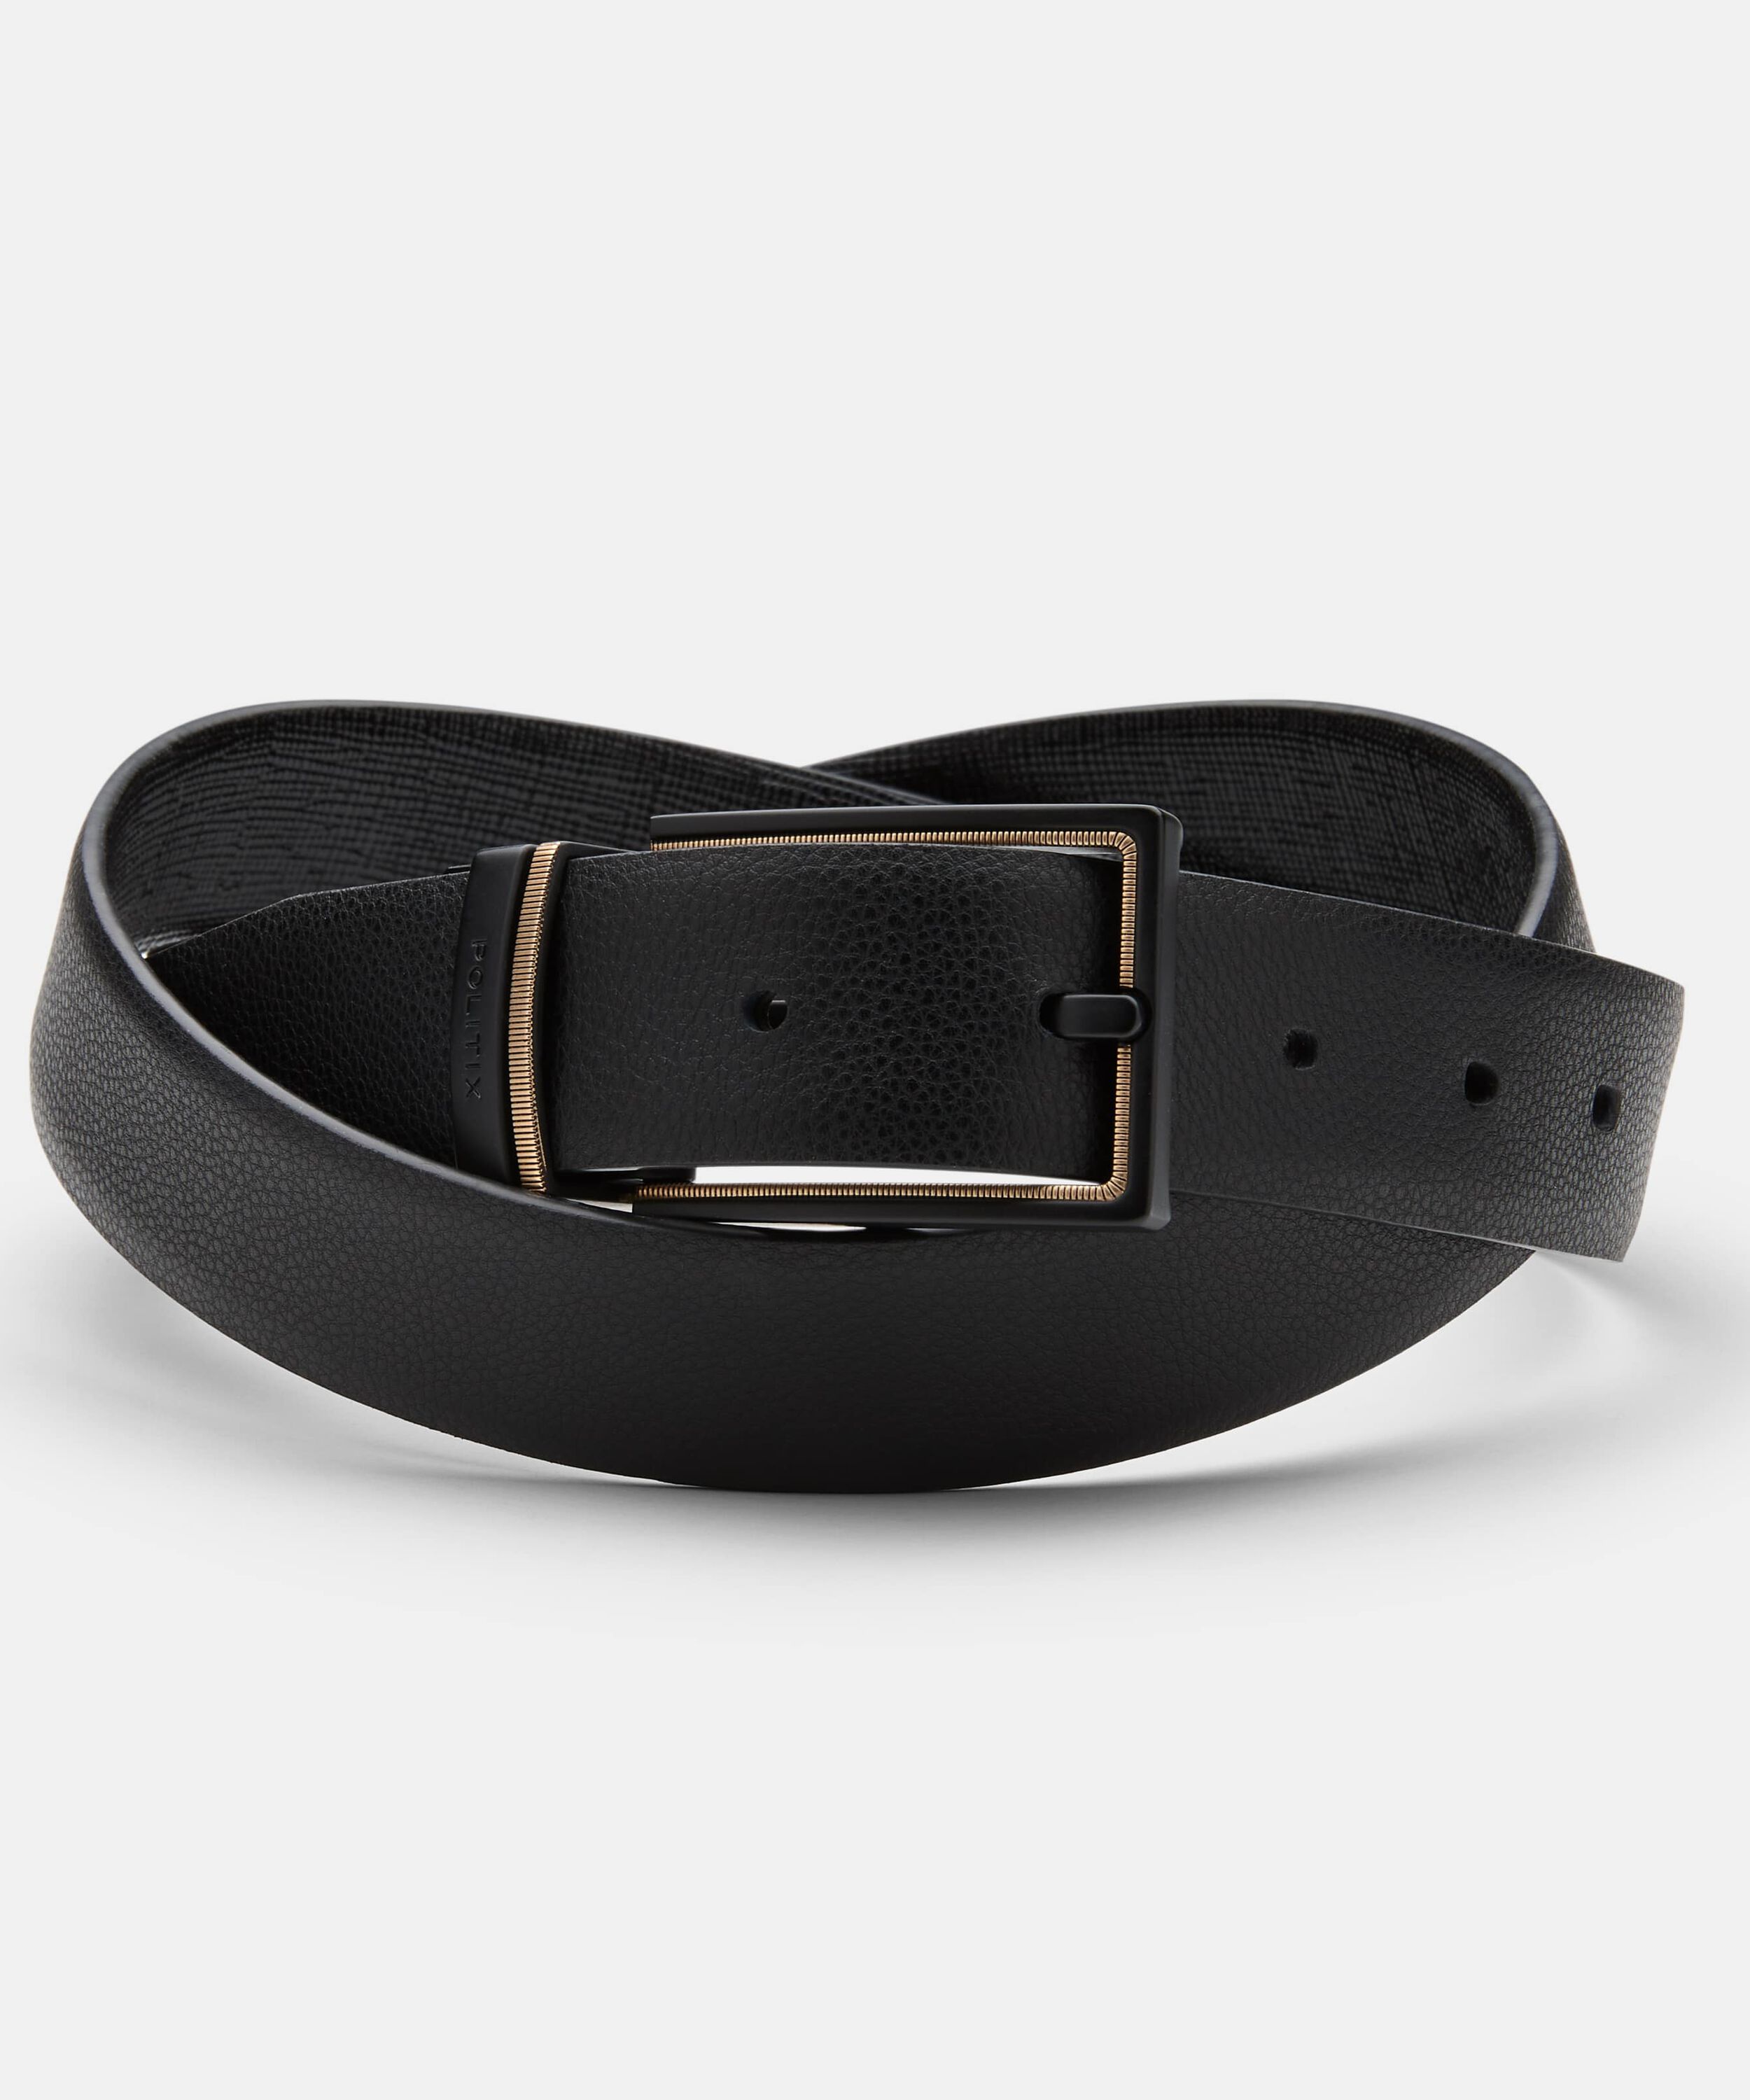 Patent Leather Saffiano Dress Belt with Pin Buckle - Black, Belts